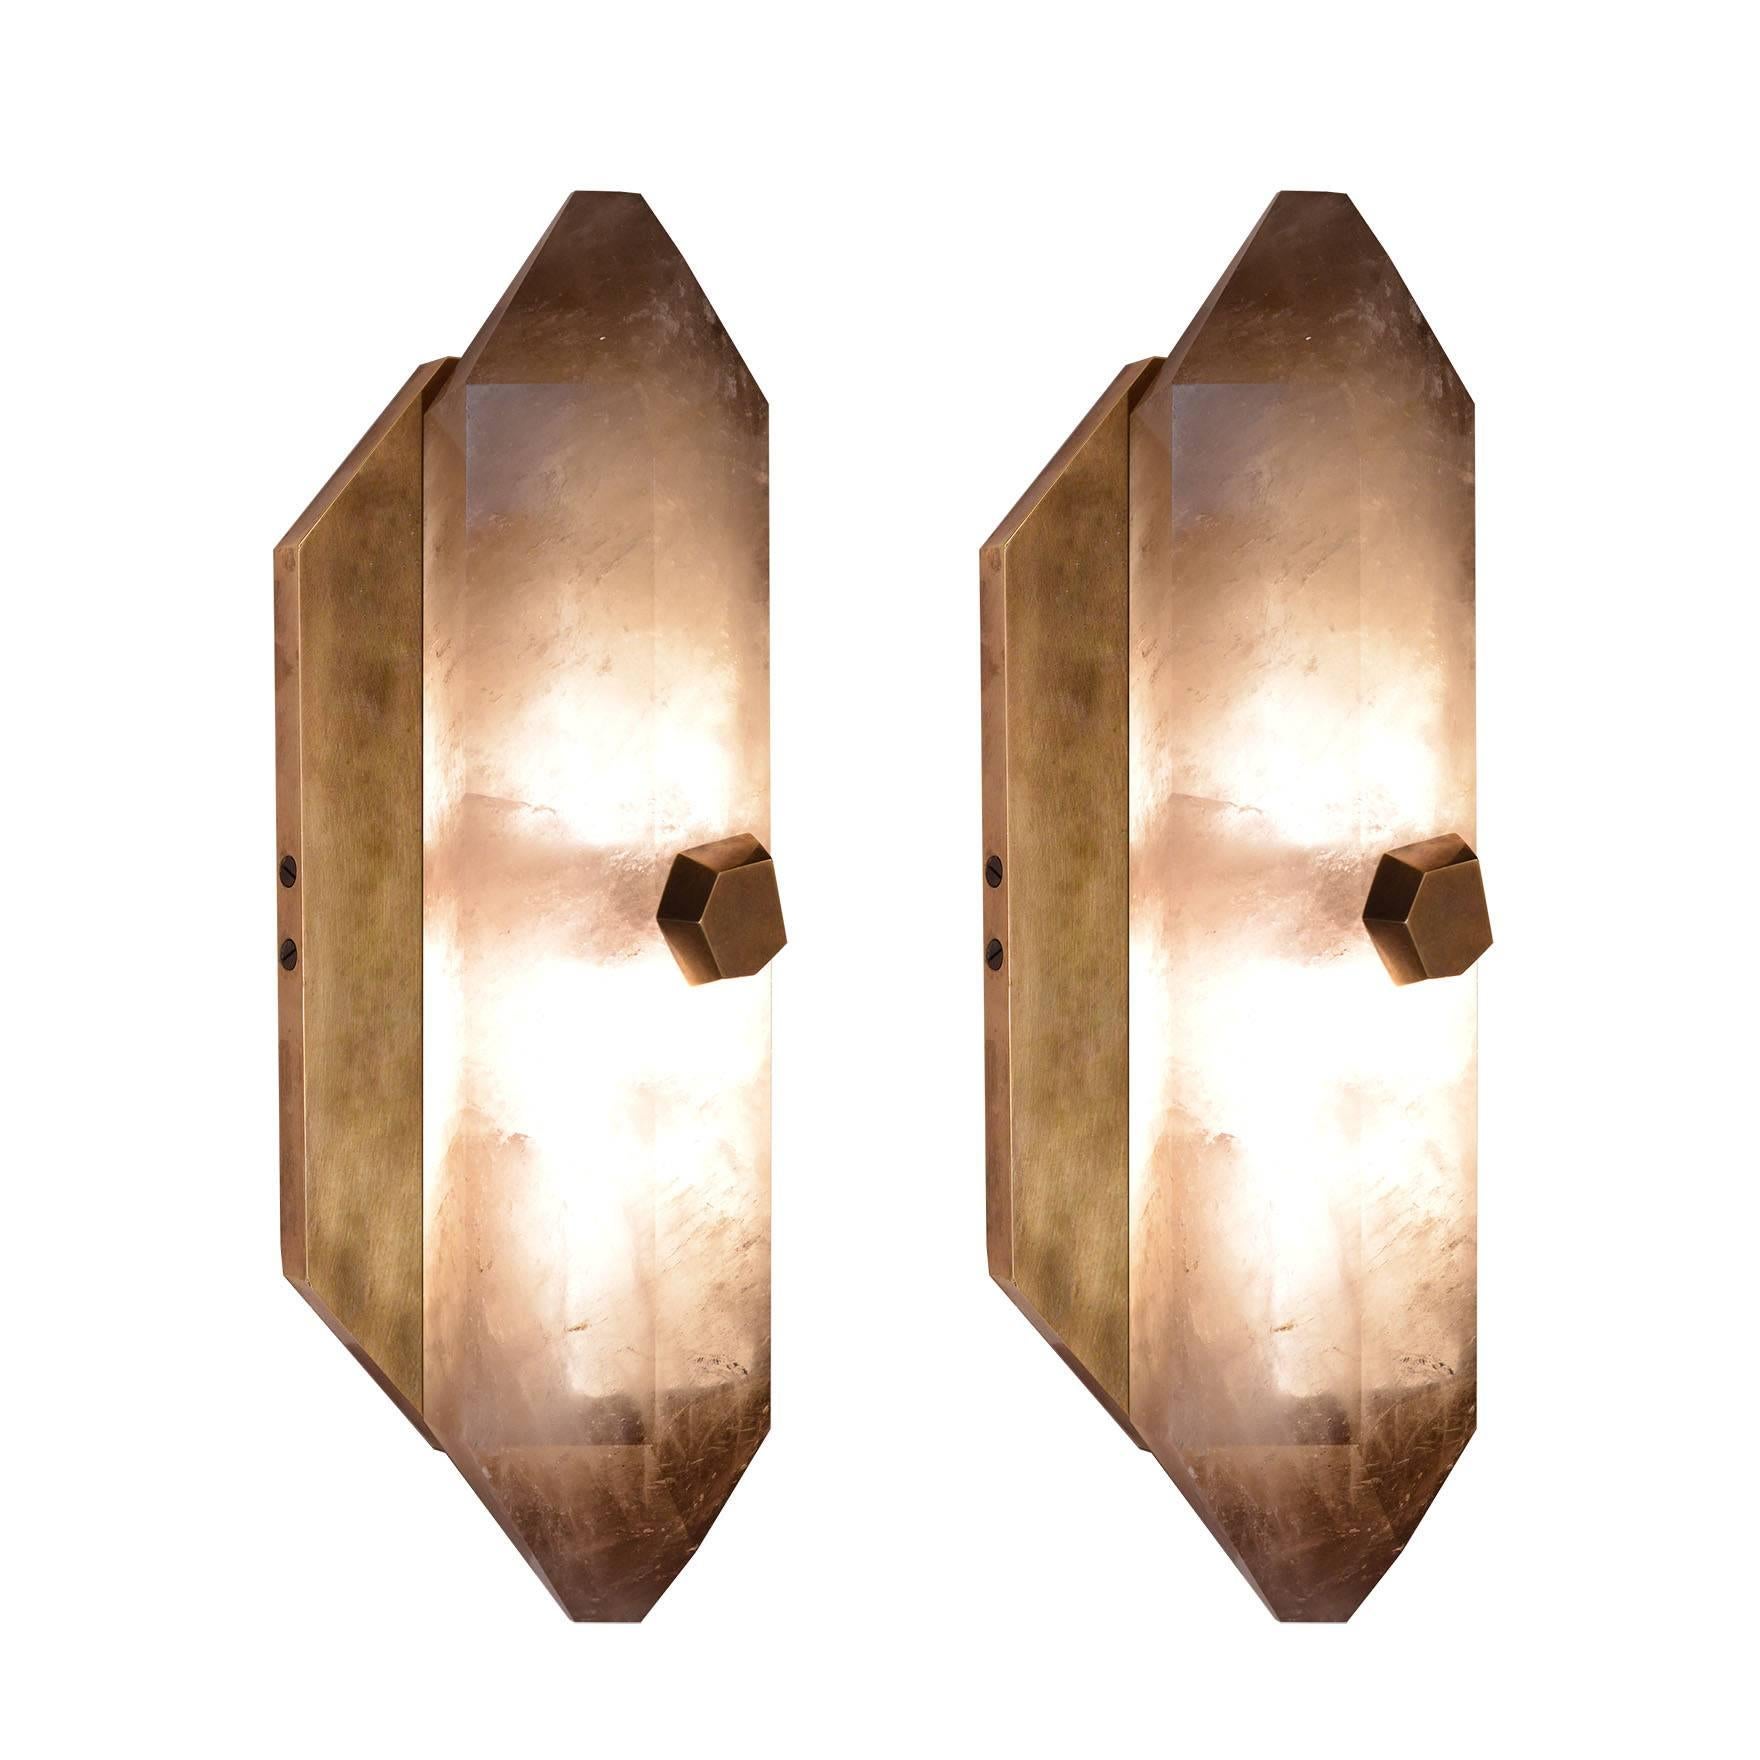 A fine carved diamond form smoky brown rock crystal quartz wall sconces with diamond form antique brass finish bolt, created by Phoenix Gallery.
Custom measurement and finish available.
Each sconces installed two sockets, and will include two LED